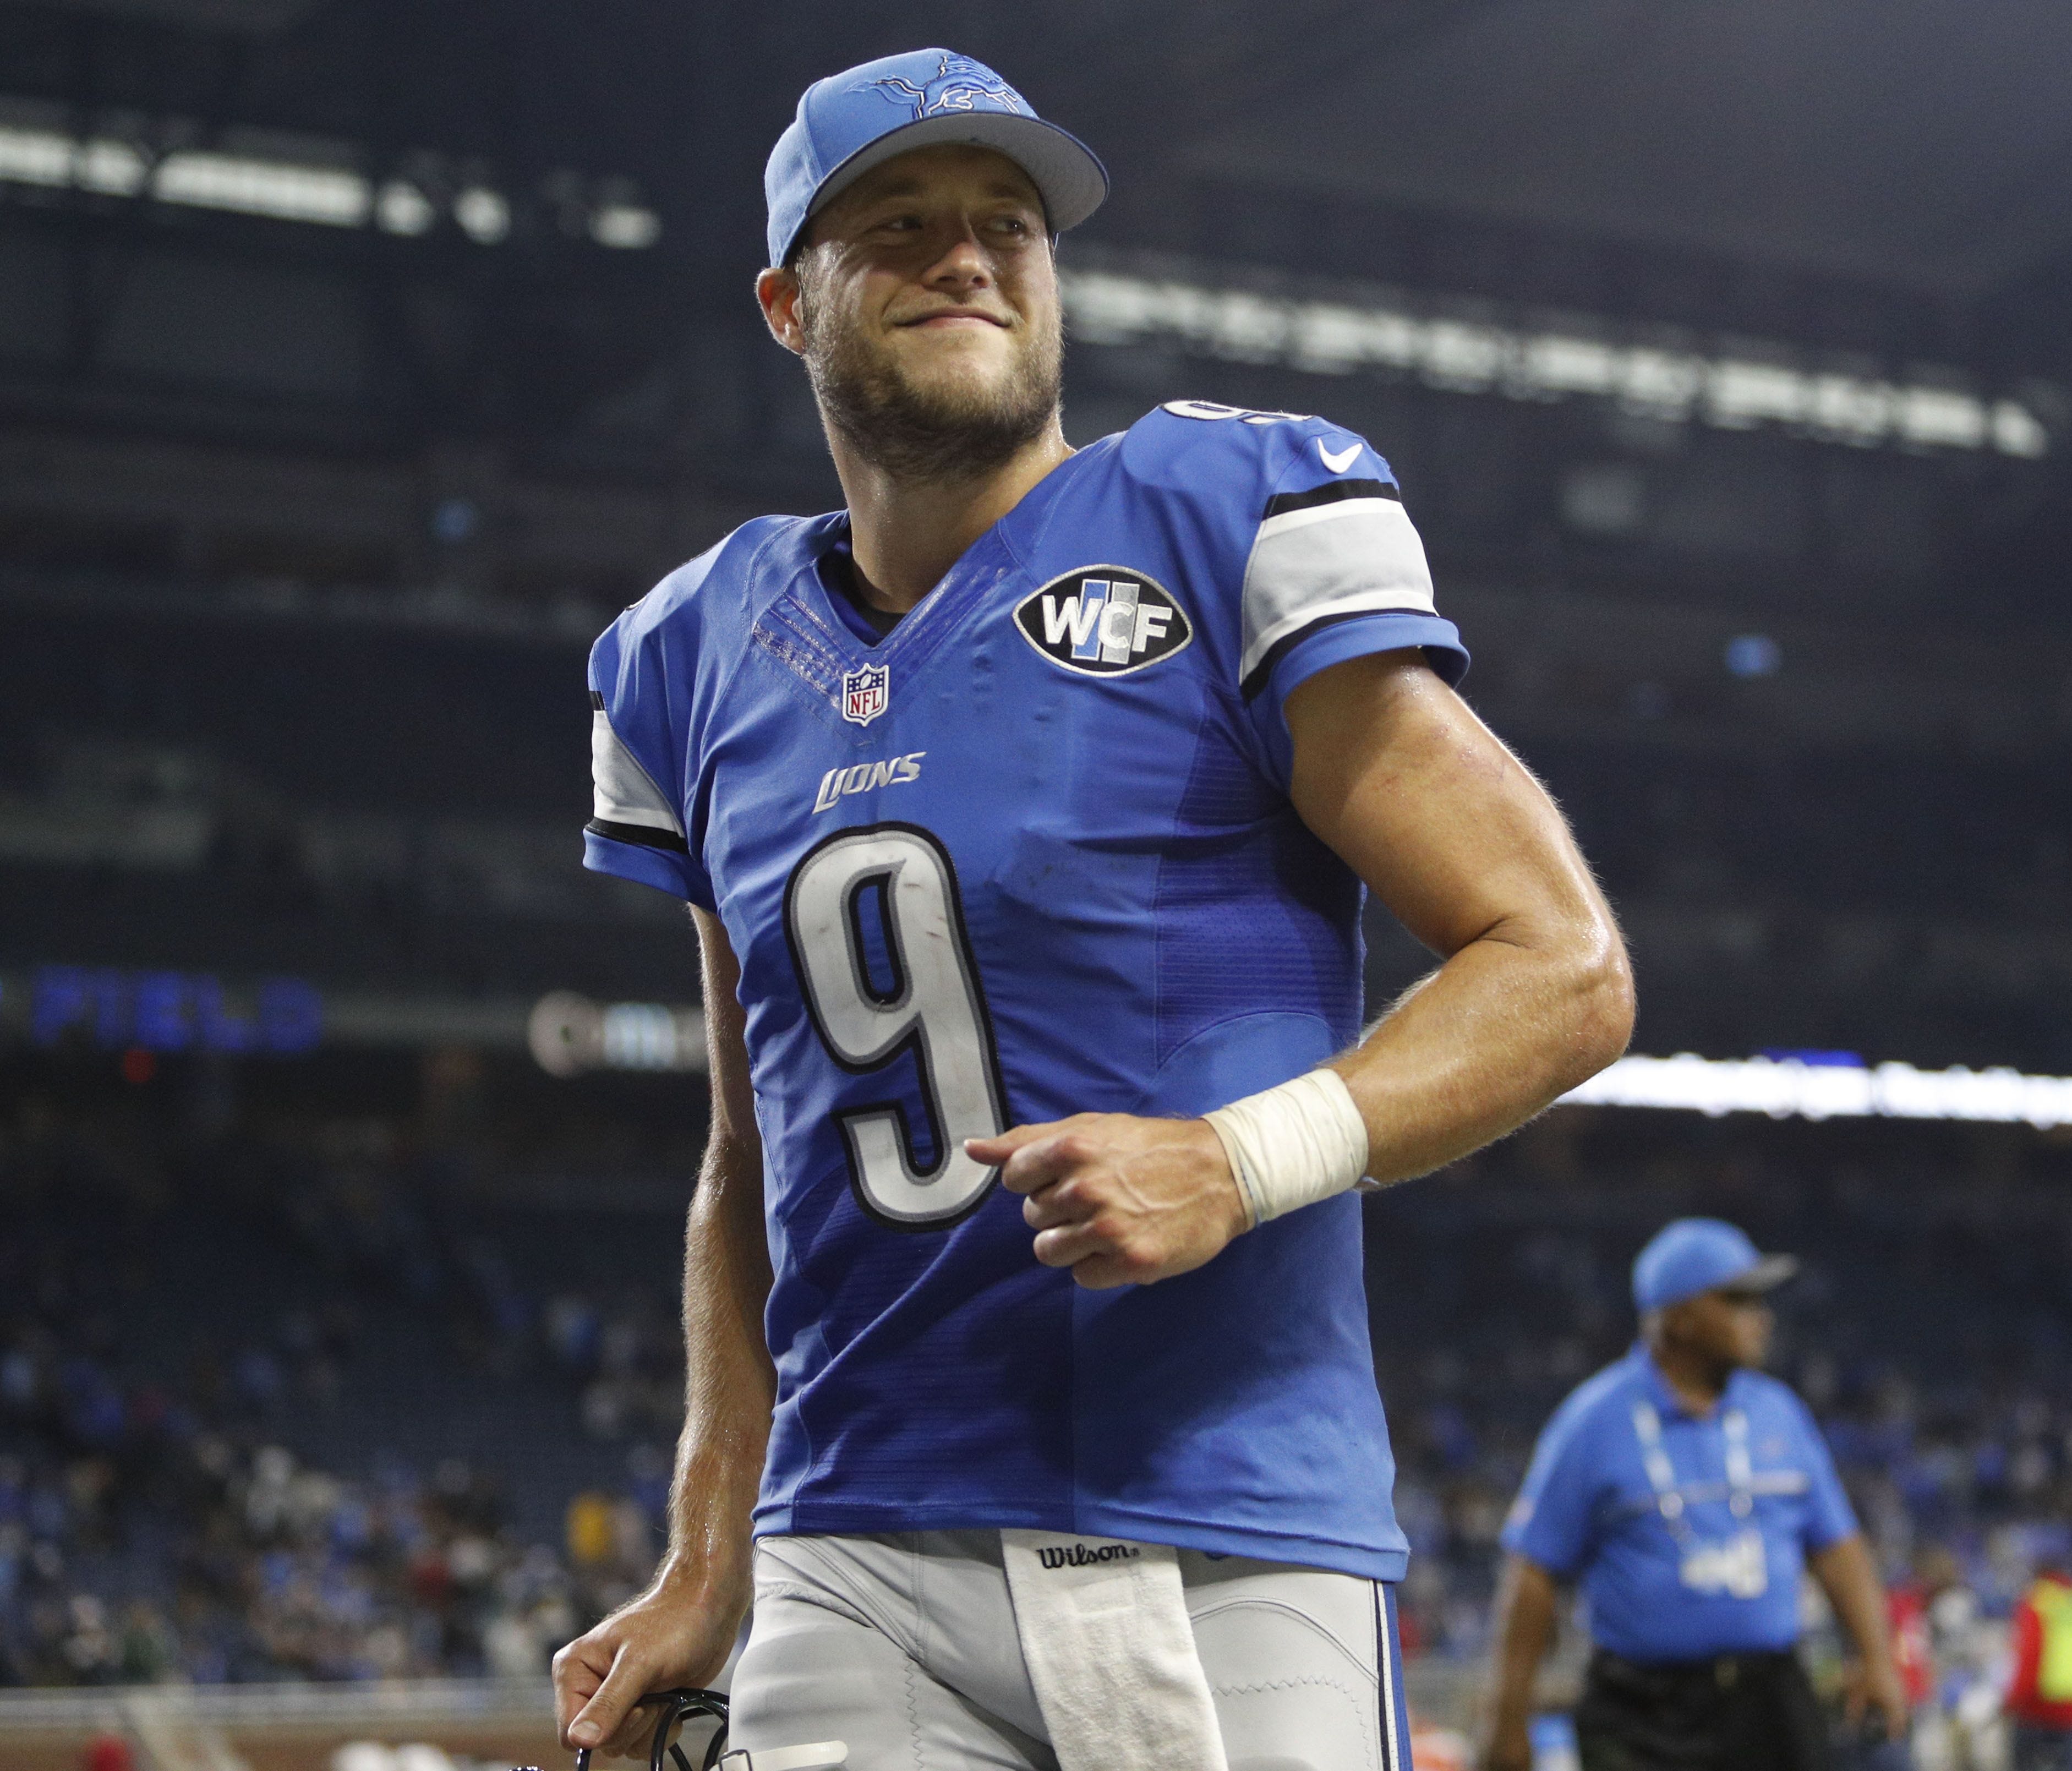 Detroit Lions quarterback Matthew Stafford (9) smiles as he jogs off the field after the game against the Los Angeles Rams at Ford Field.